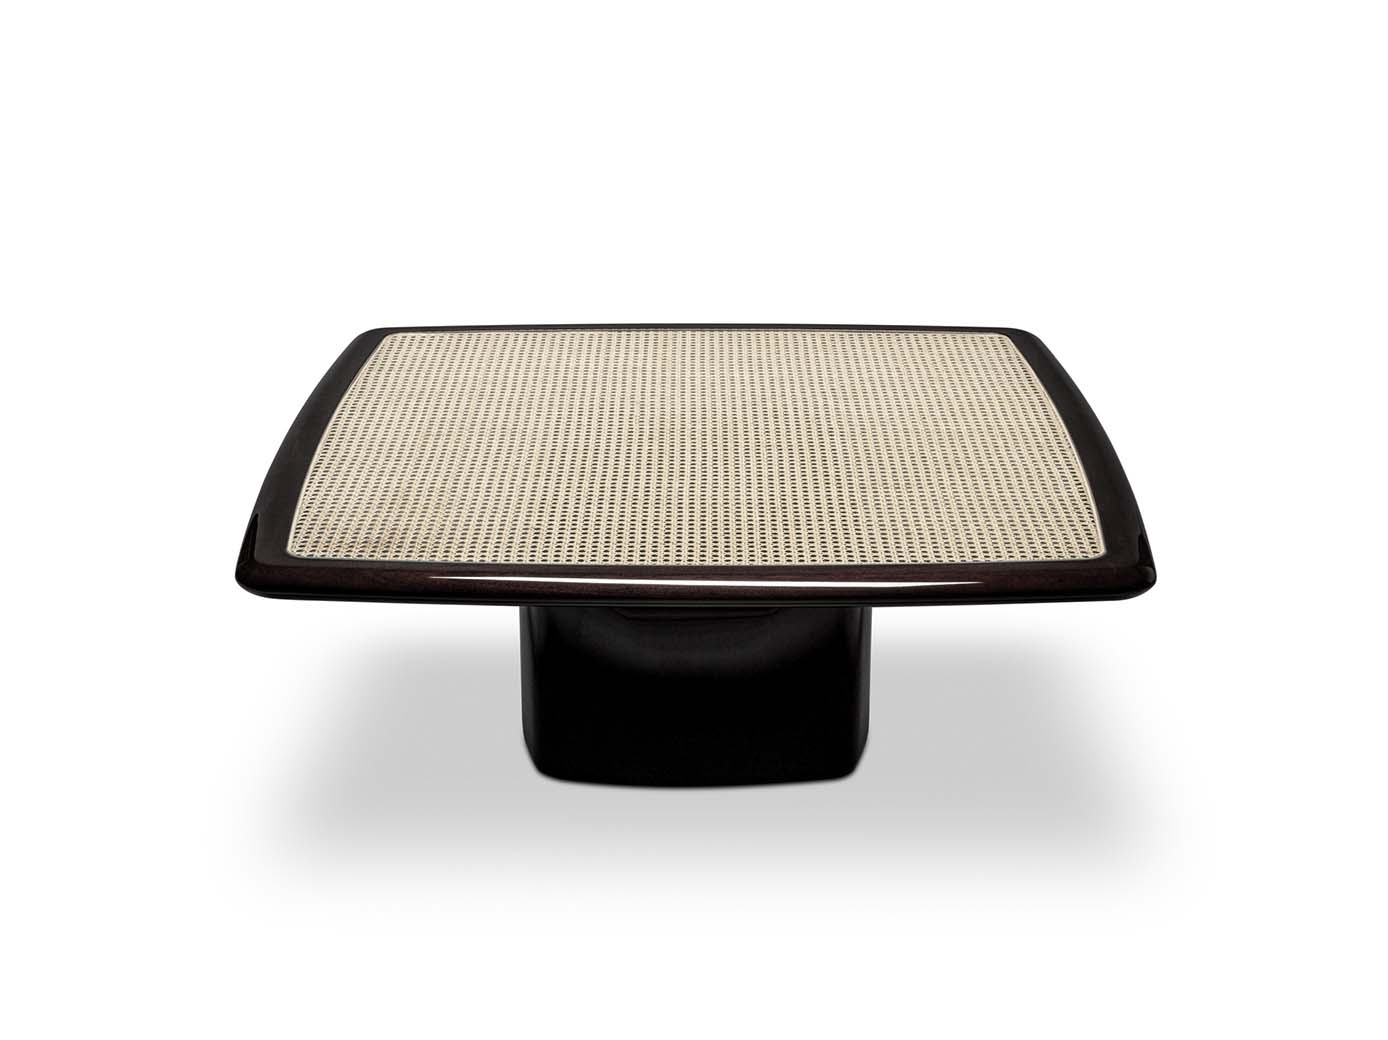 BOSSA | Coffee table by Duistt $11,900.00